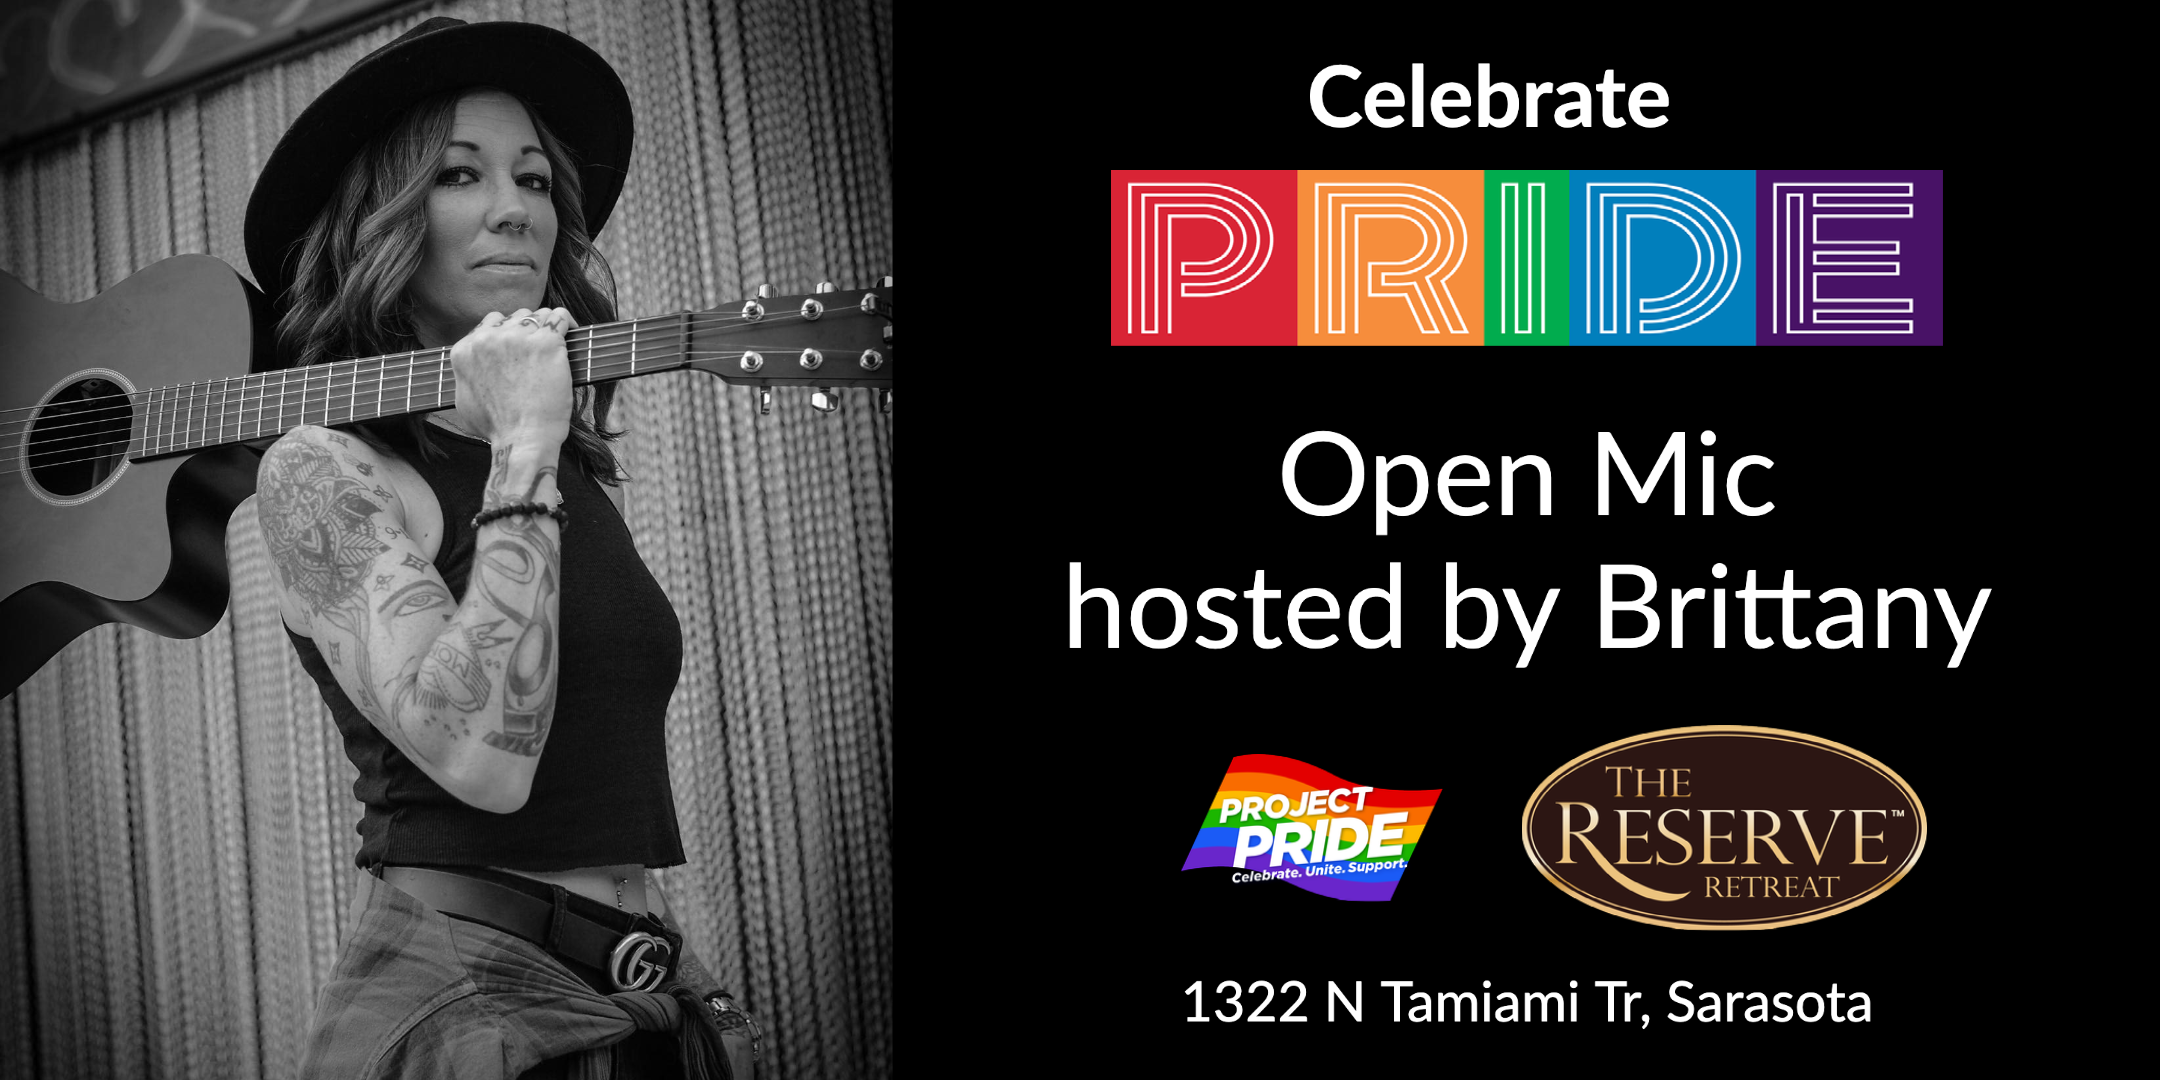 Brittany Loeffler hosts Open Mic during PRIDE month at The Reserve Retreat in Sarasota Florida